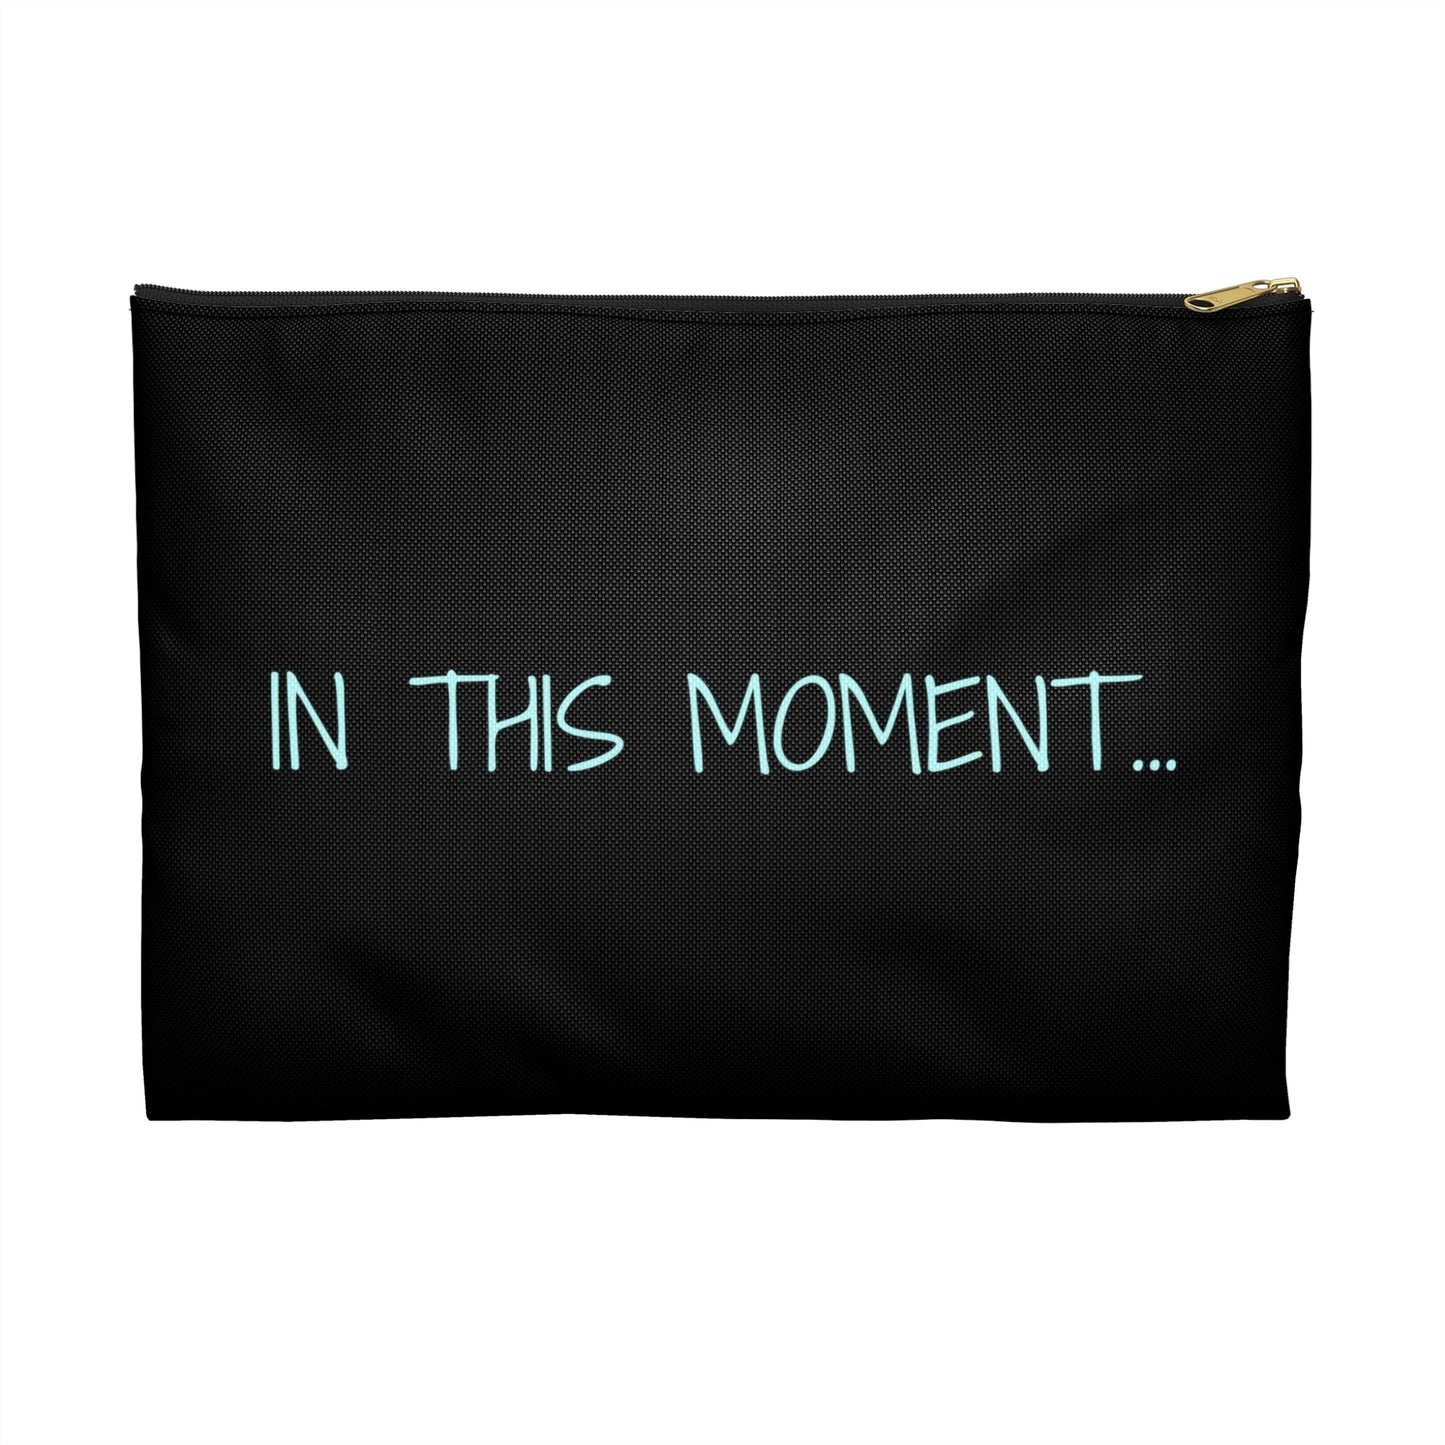 "IN THIS MOMENT WITH BLUE BURST" Accessory Pouches